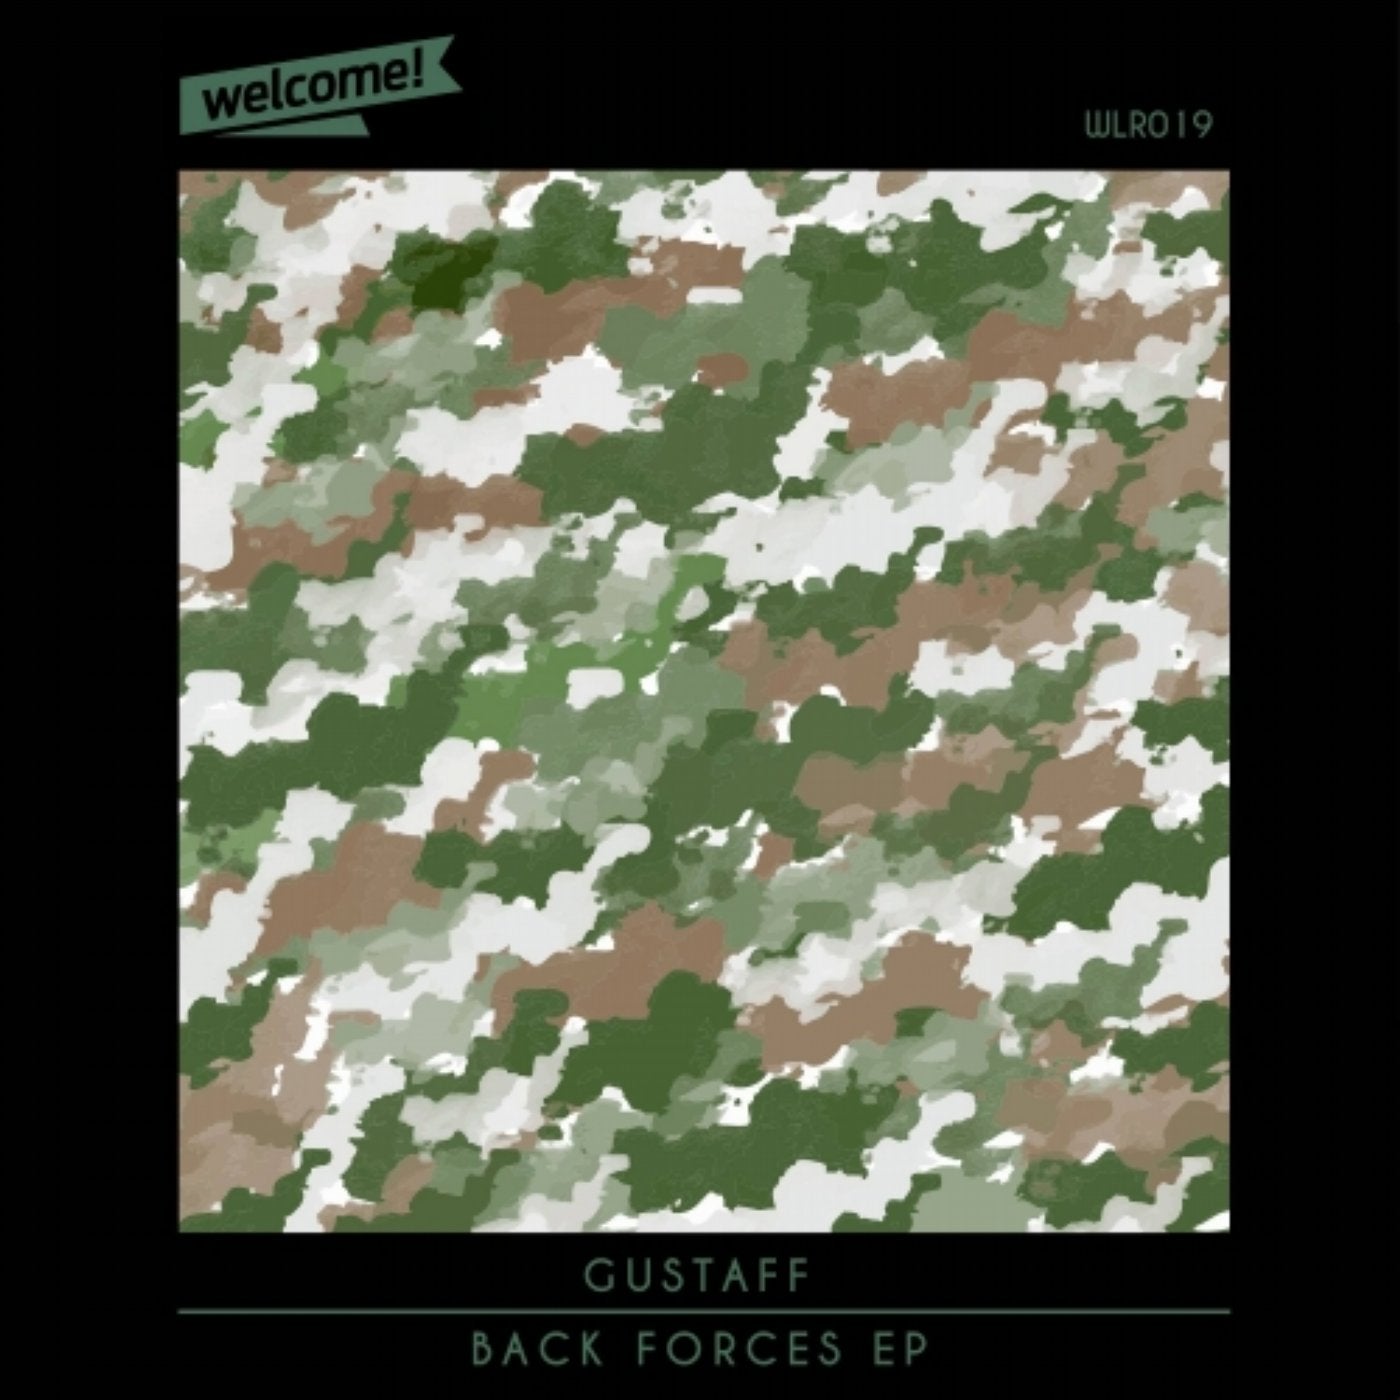 Back Forces EP